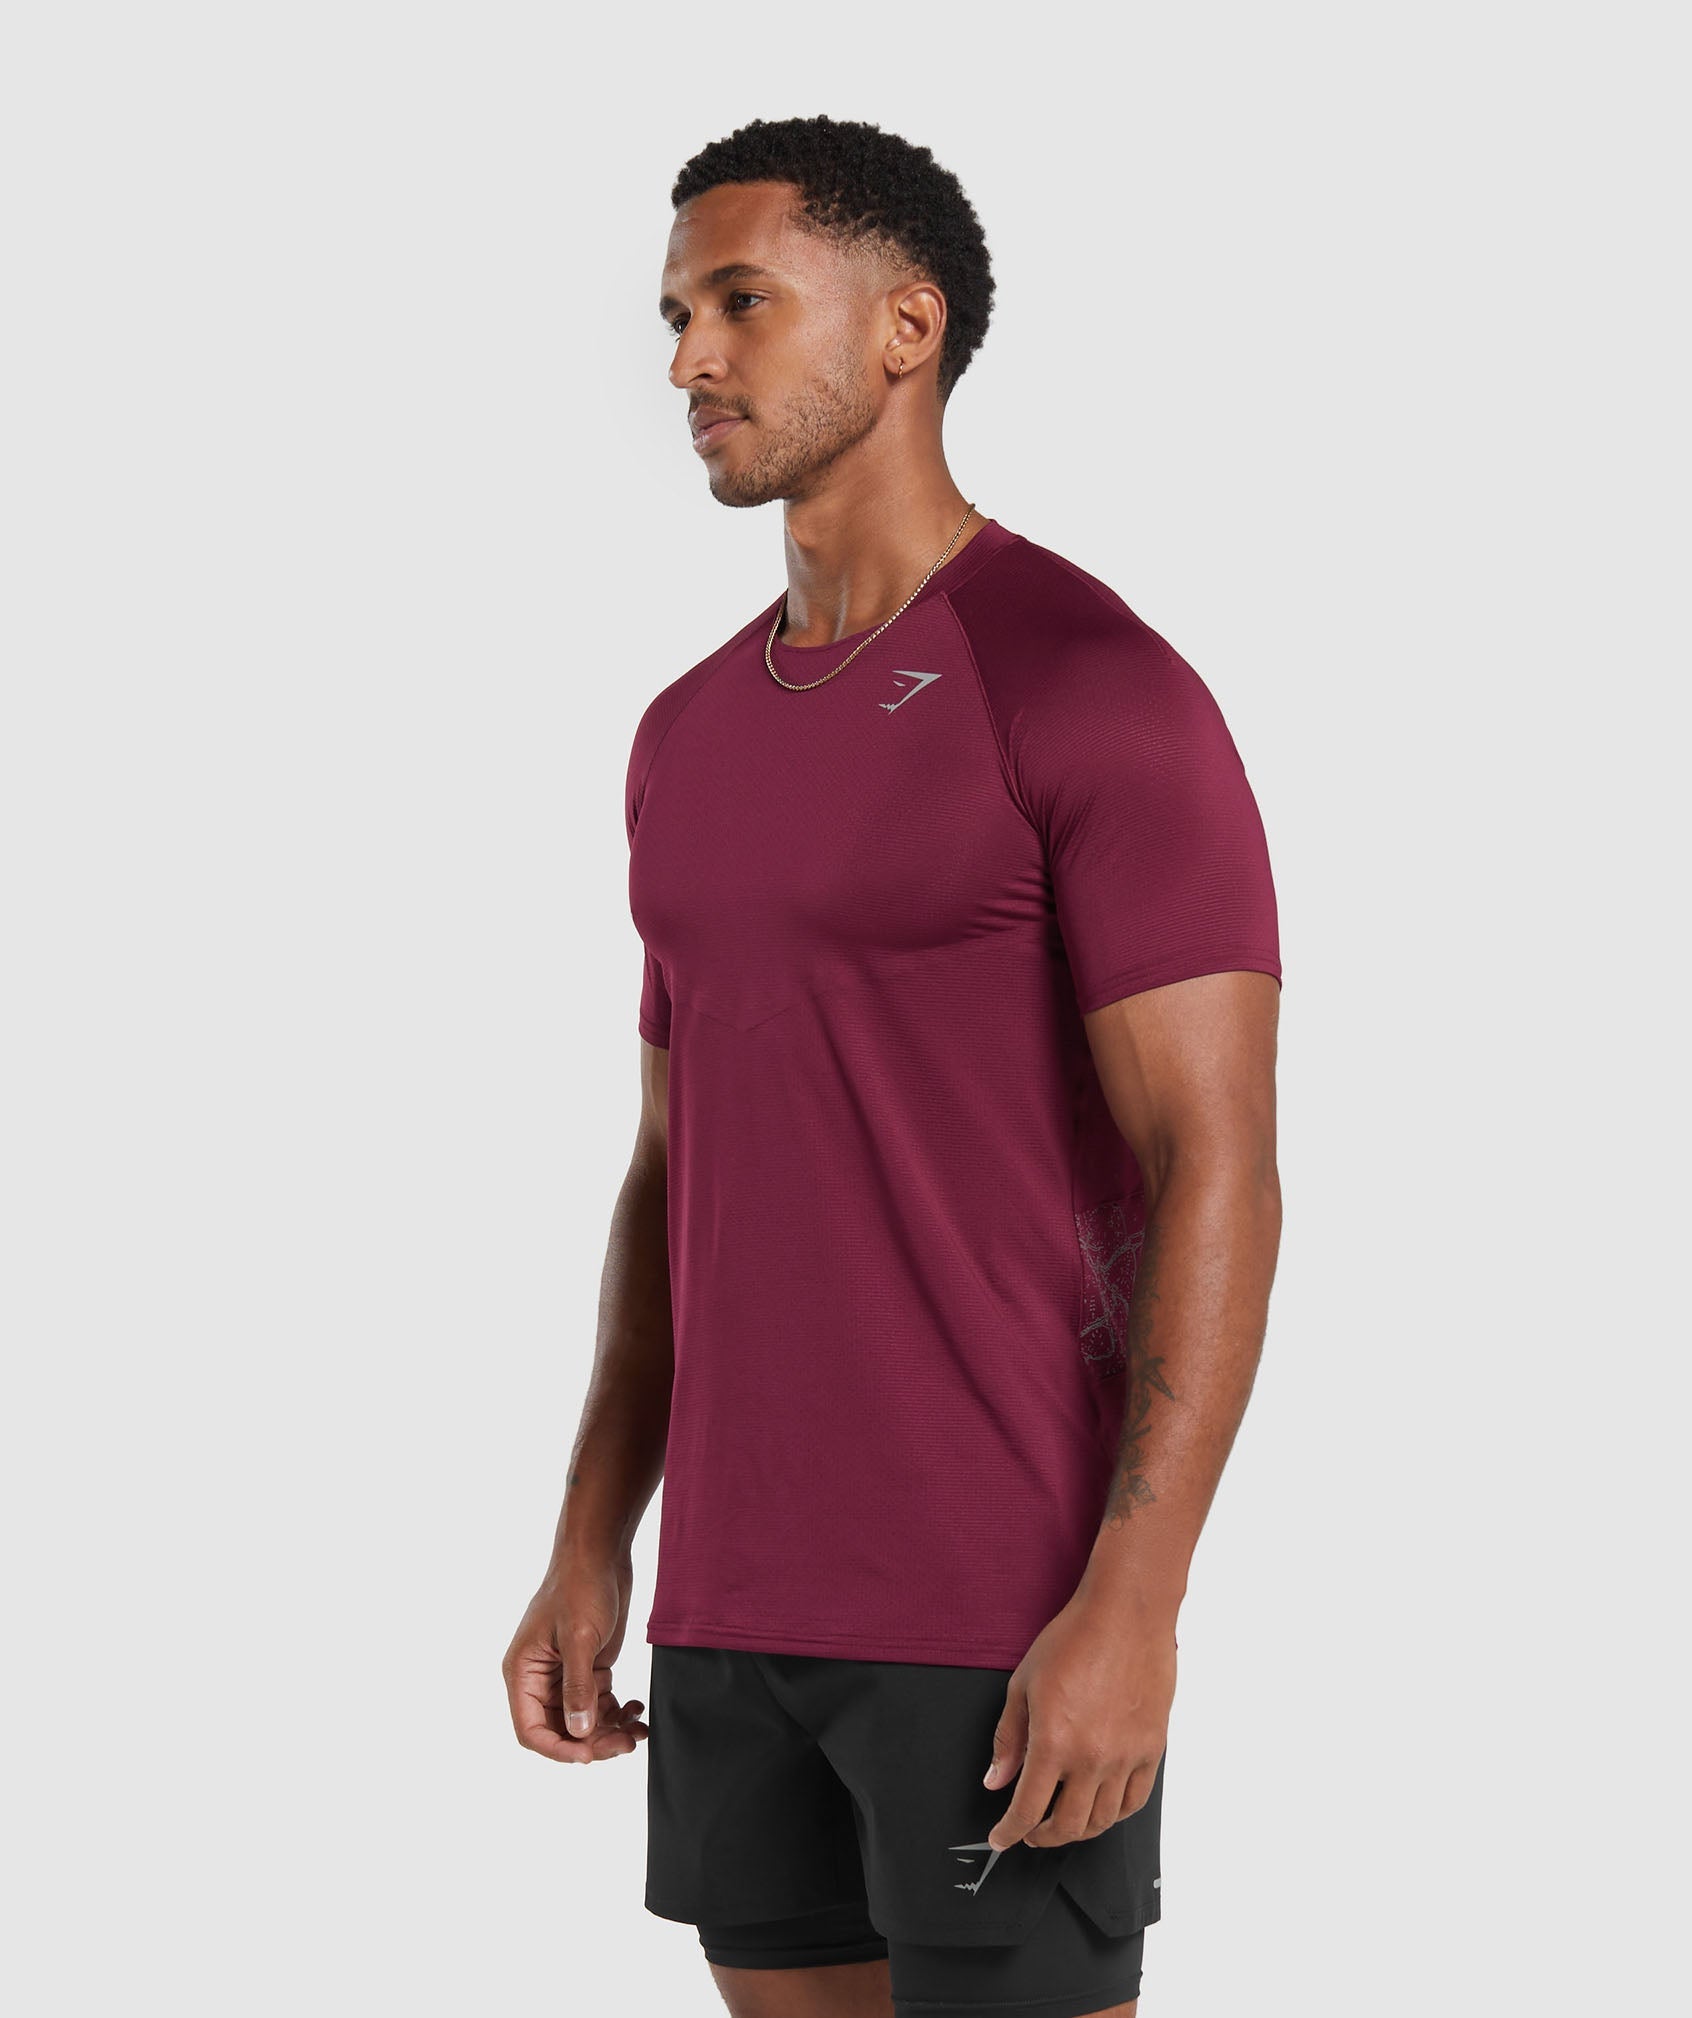 Speed T-Shirt in Plum Pink - view 3